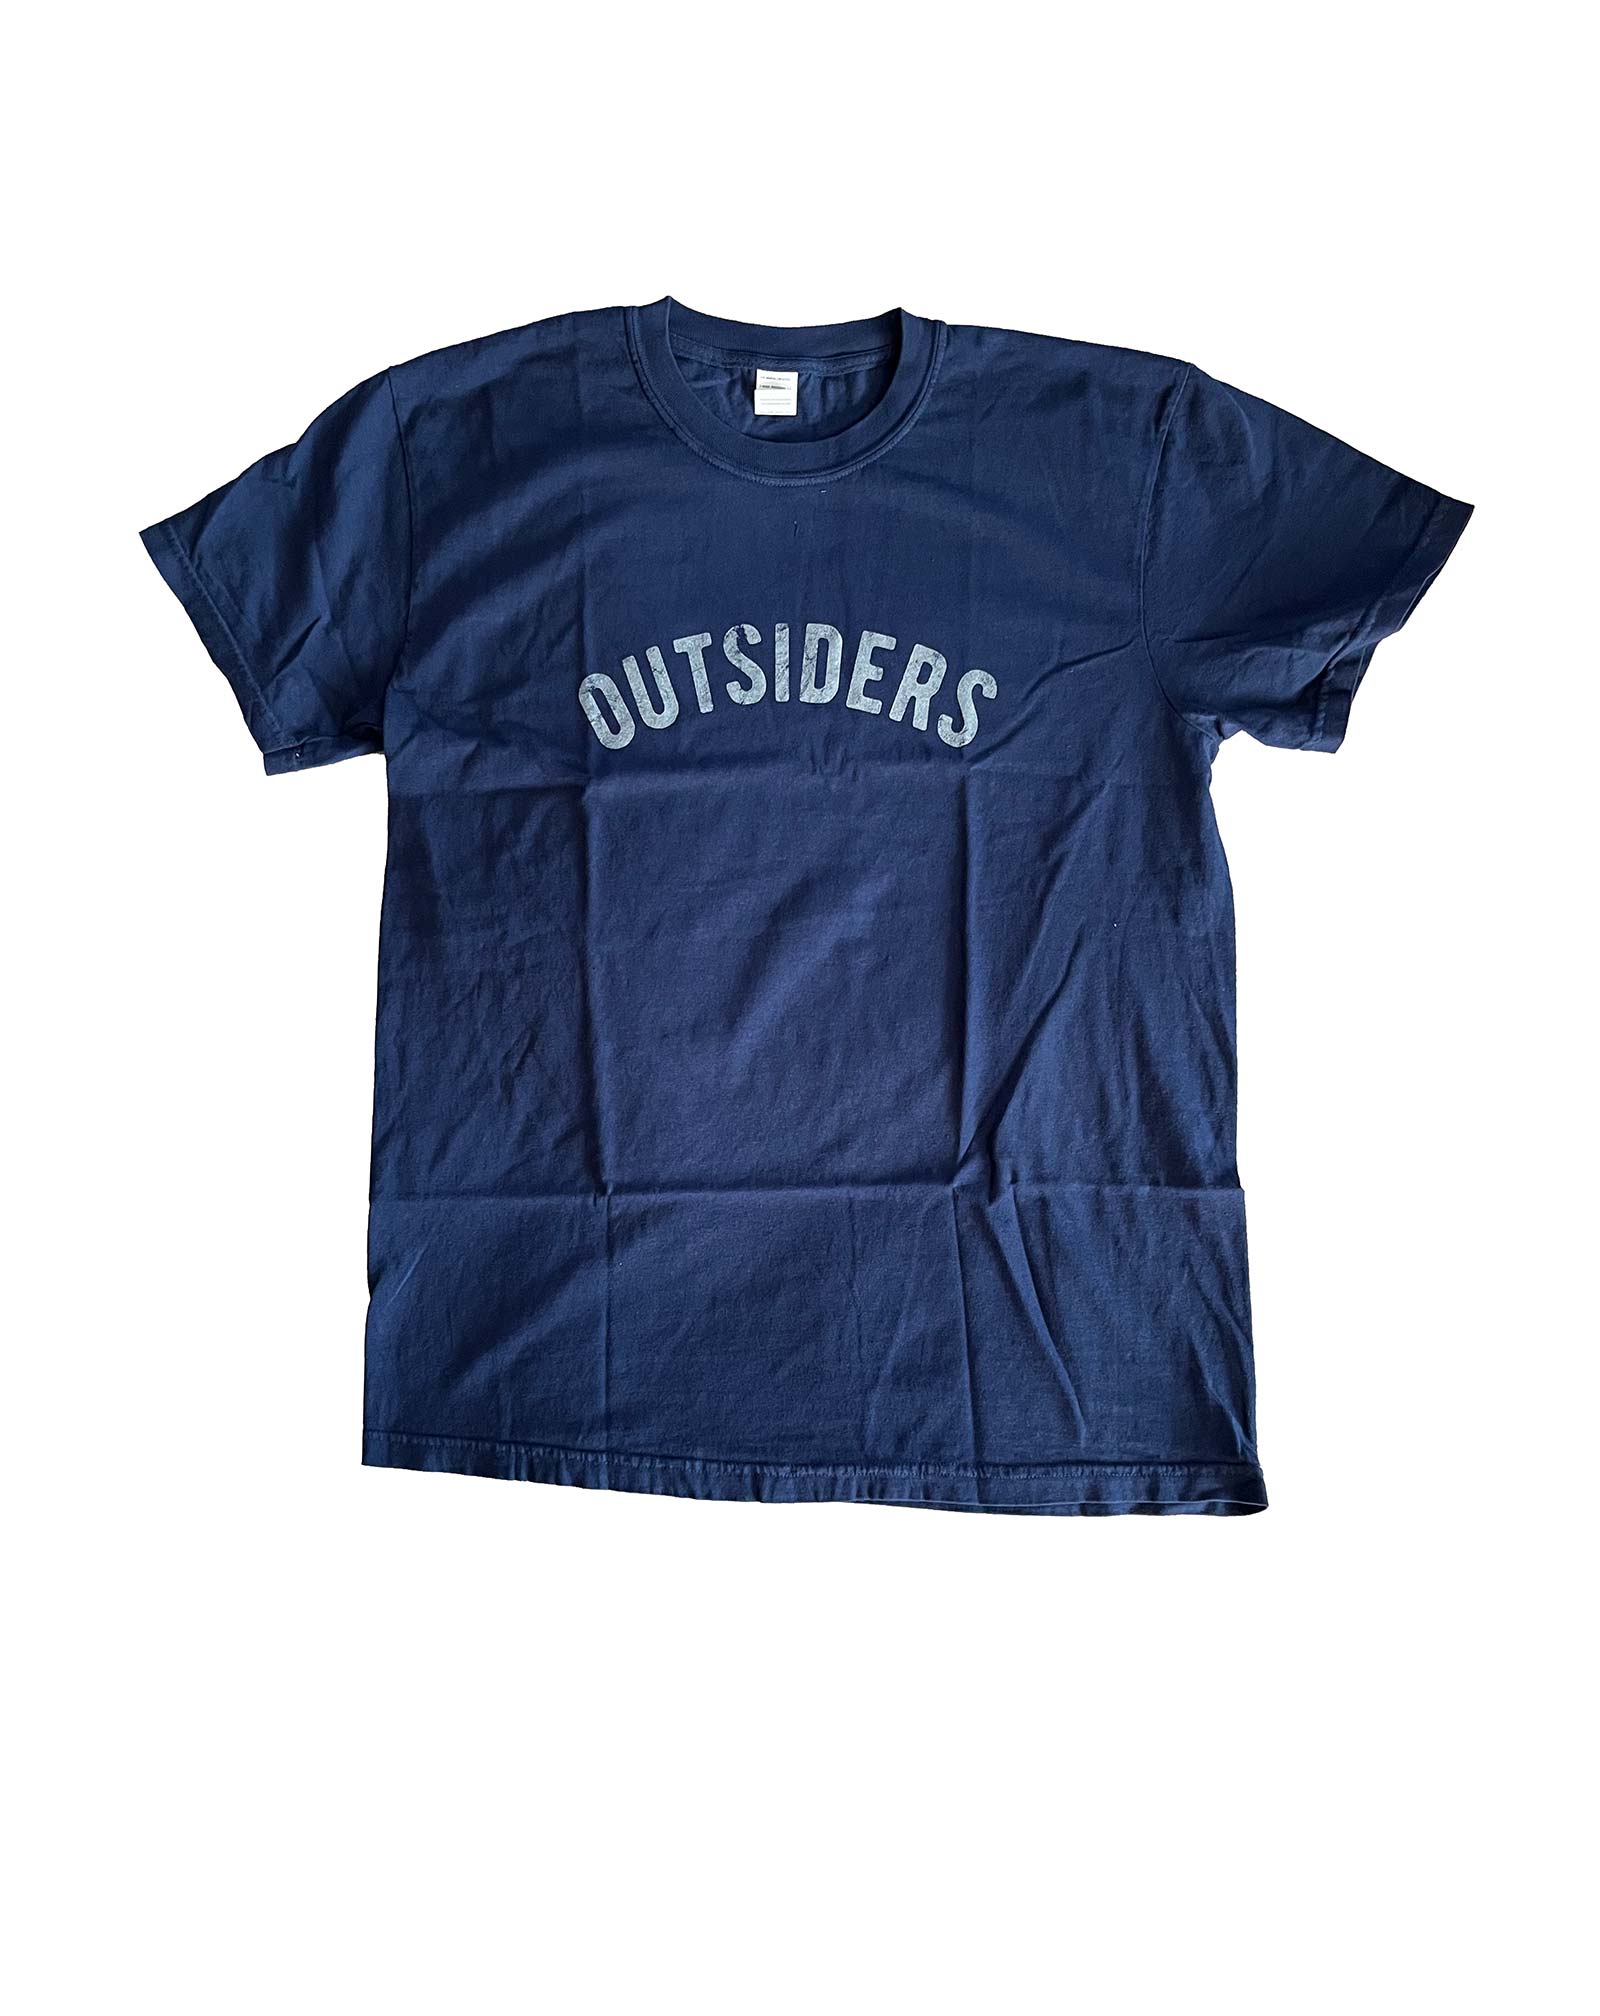 OUTSIDERS T - Navy